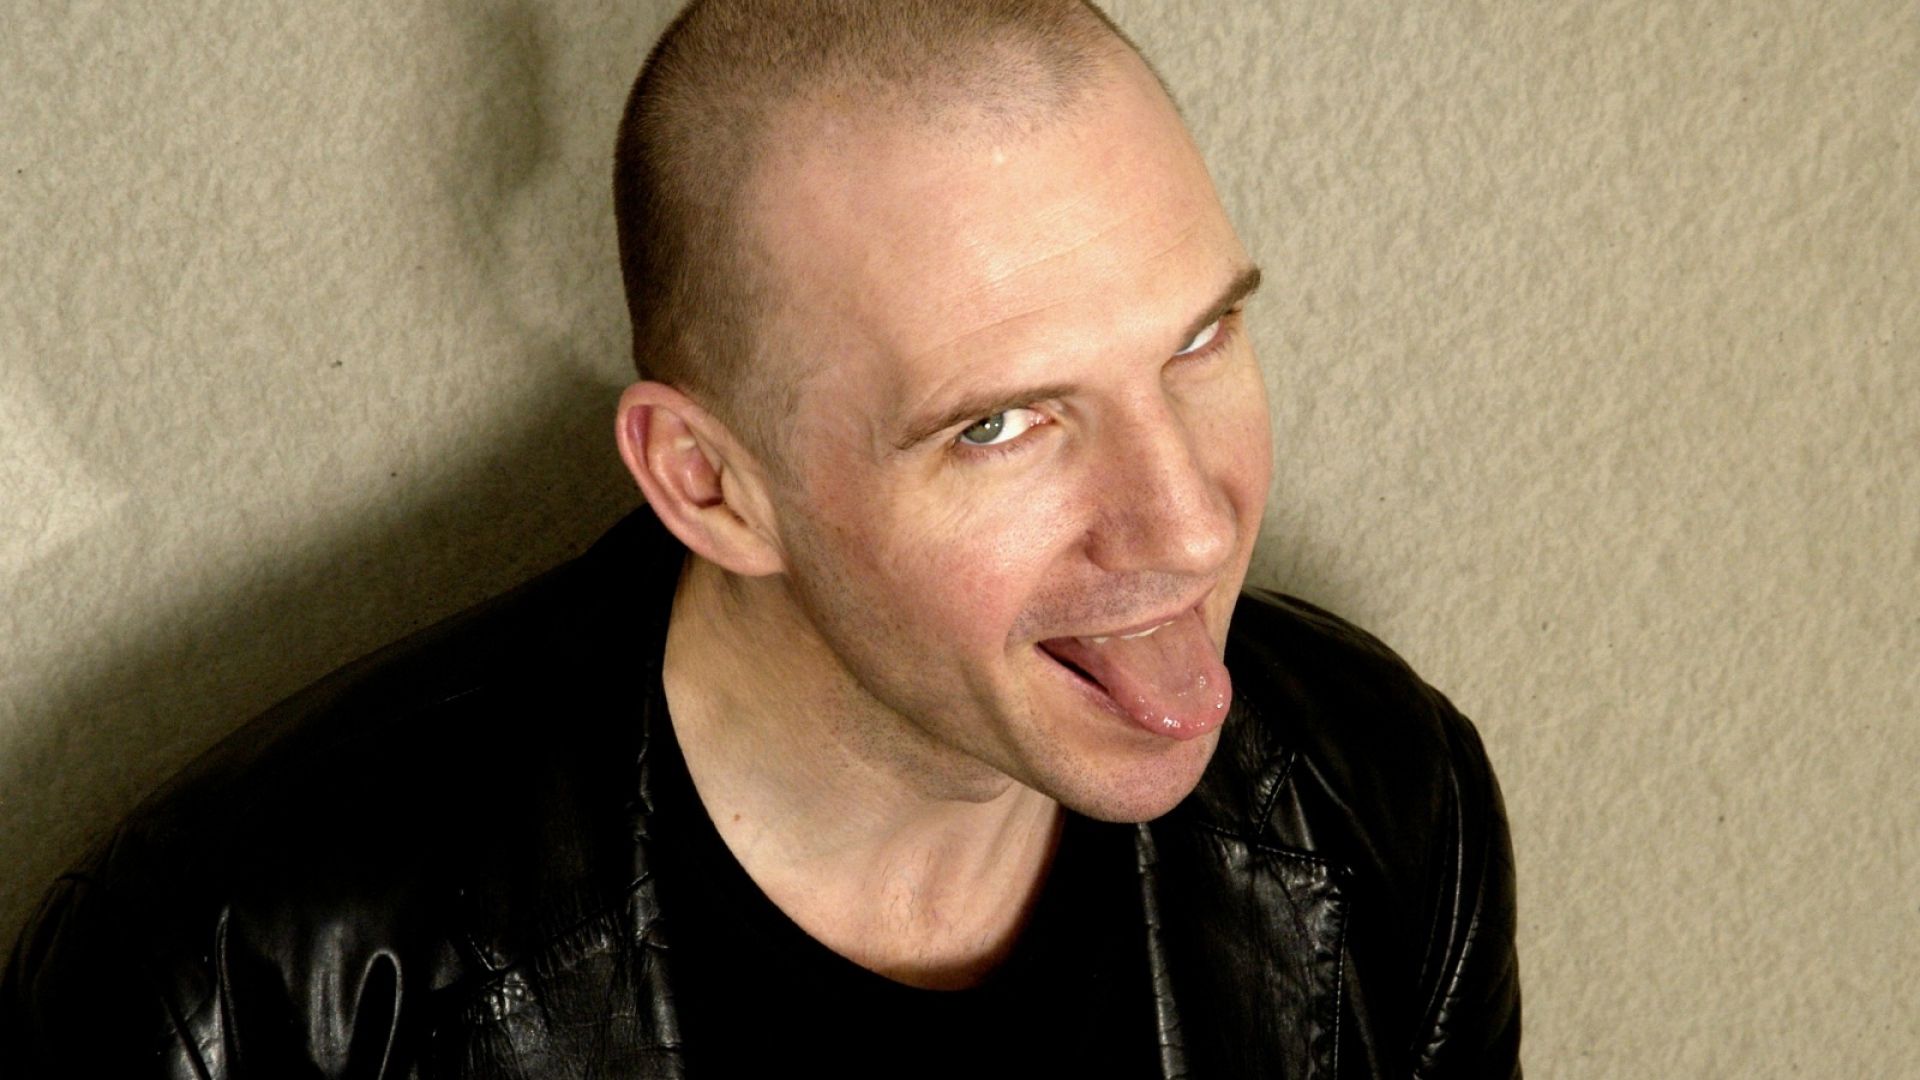 Download Wallpaper 1920x1080 ralph fiennes, actor, smile, tongue, bald Full HD 1080p HD Background